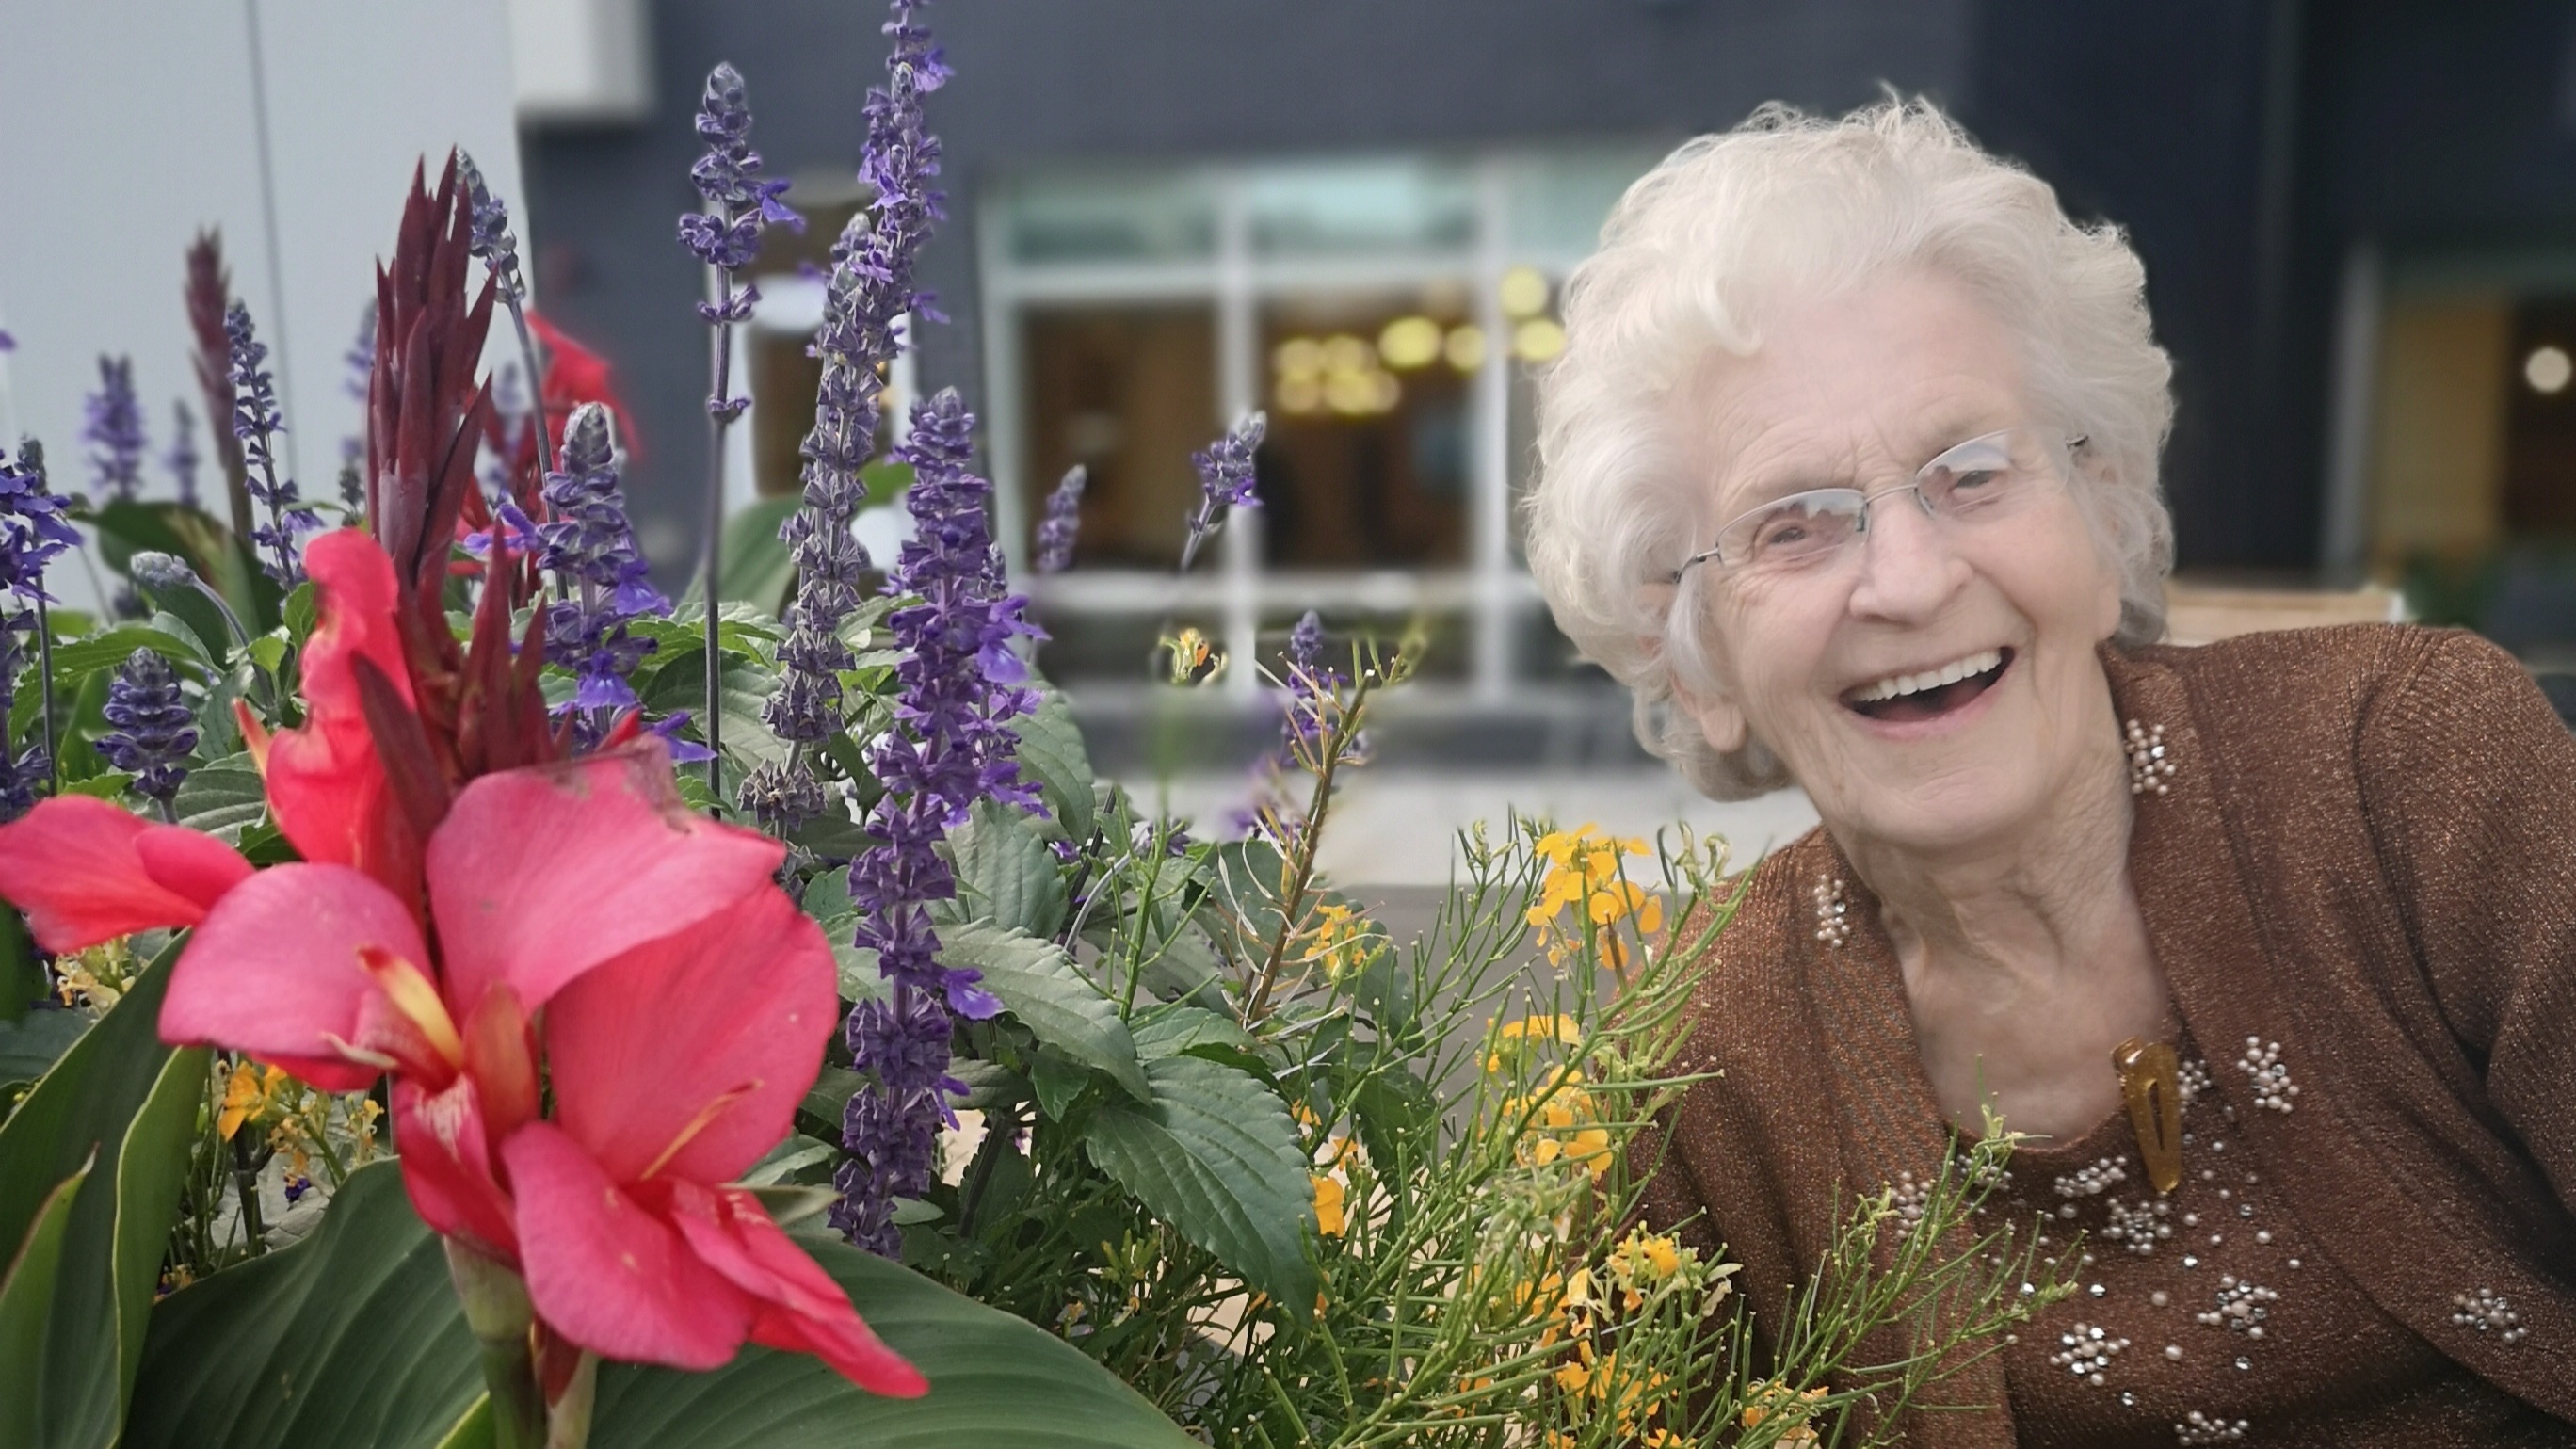 A senior lady smiling beside pink, purple and yellow flowers